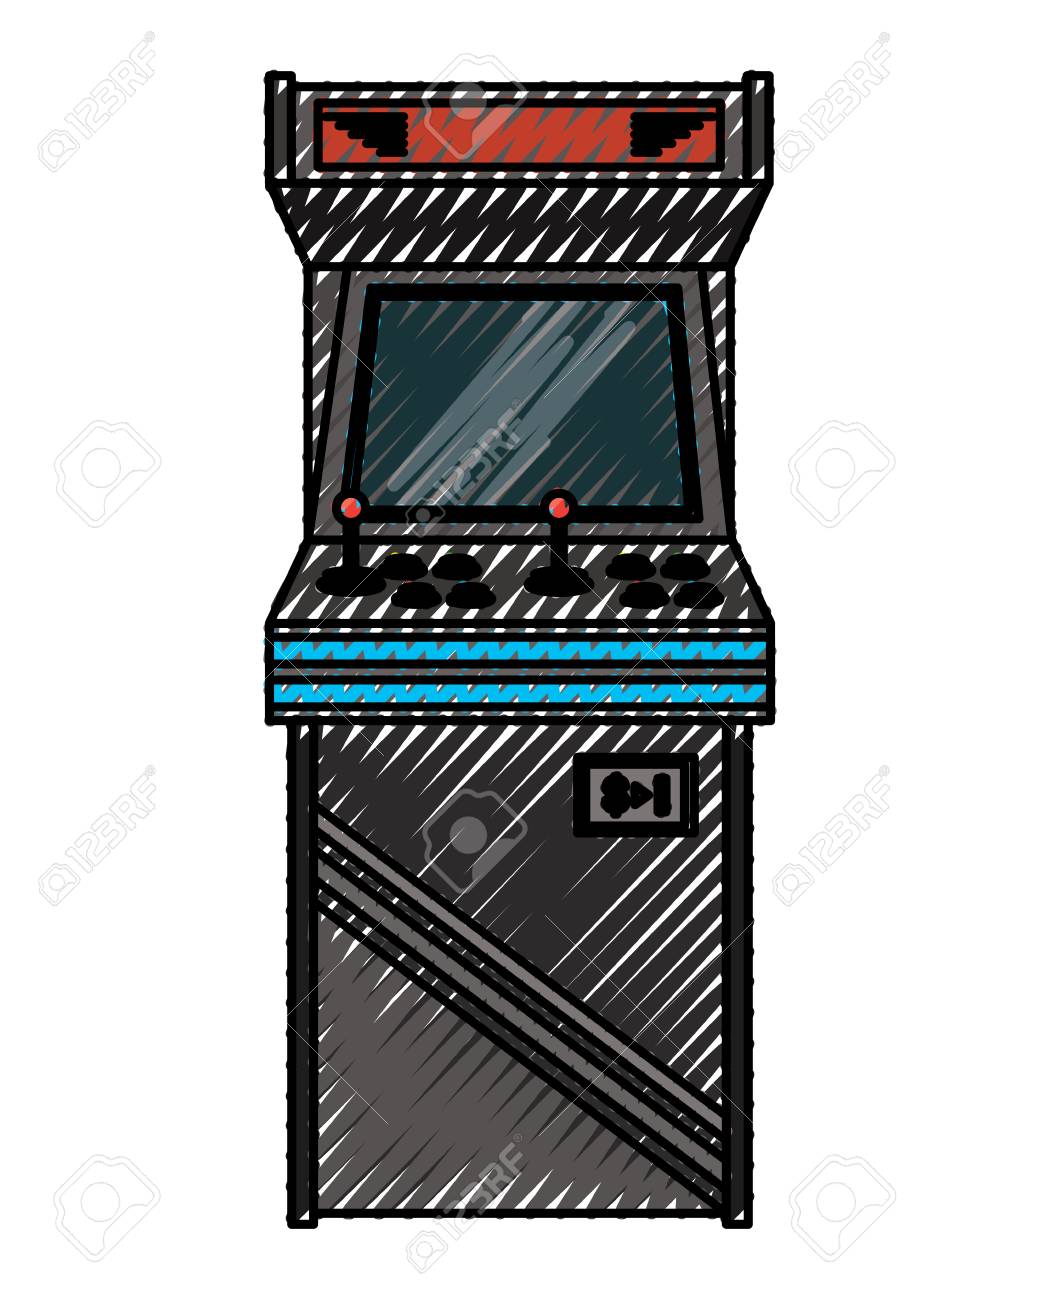 96452538-vintage-arcade-game-machine-with-joysticks-and-buttons-vector-illustration-drawing-de...jpg